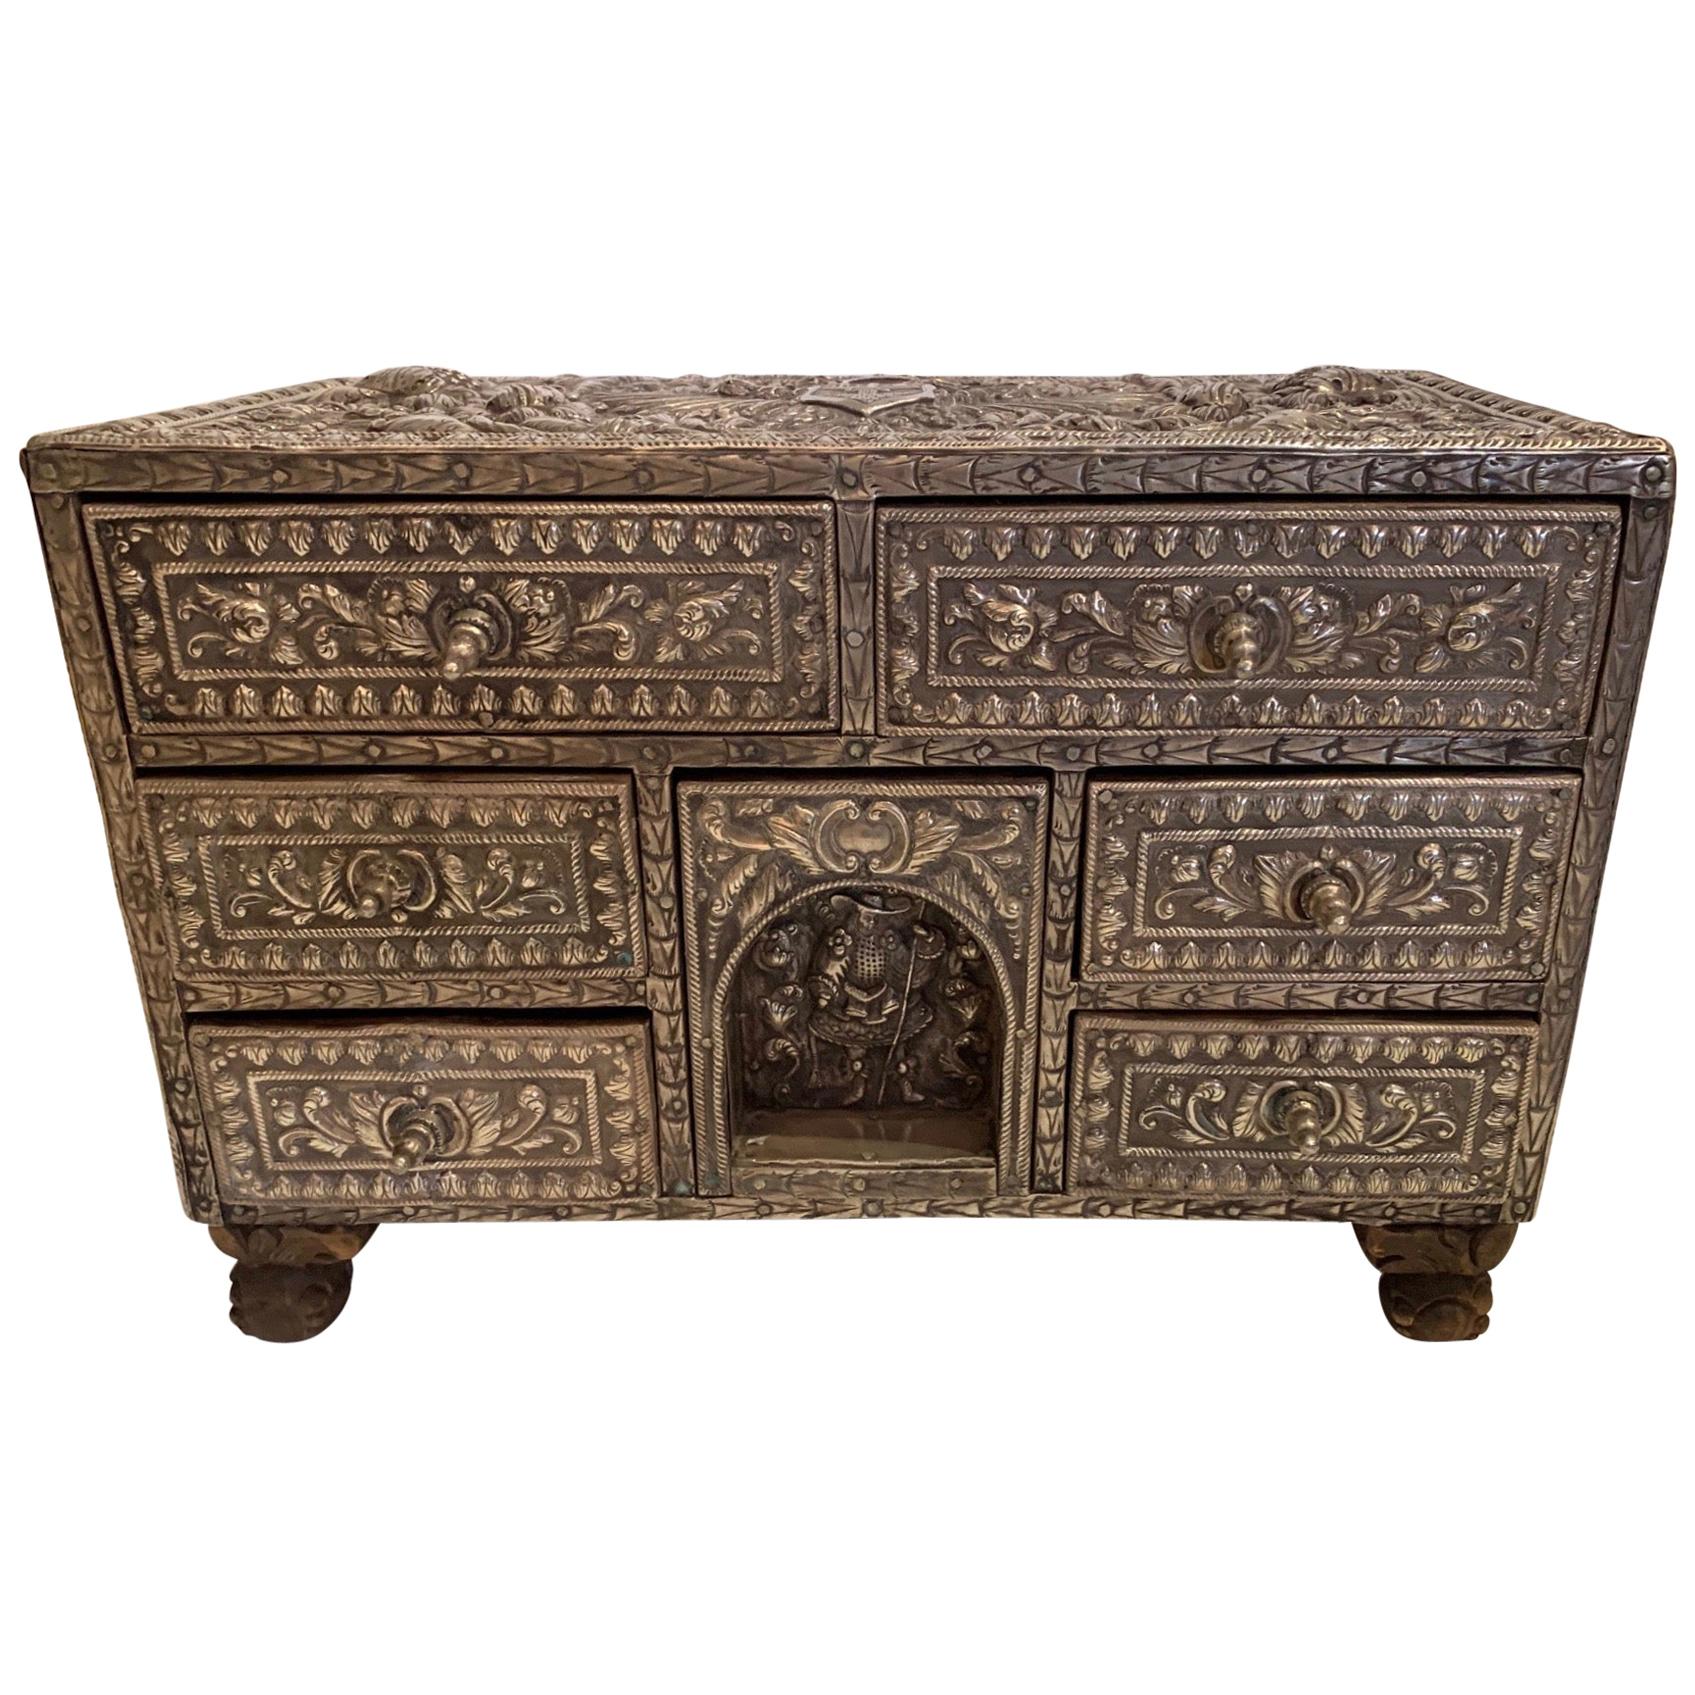 Gorgeous Indian Silvered Filigree Box with Many Drawers